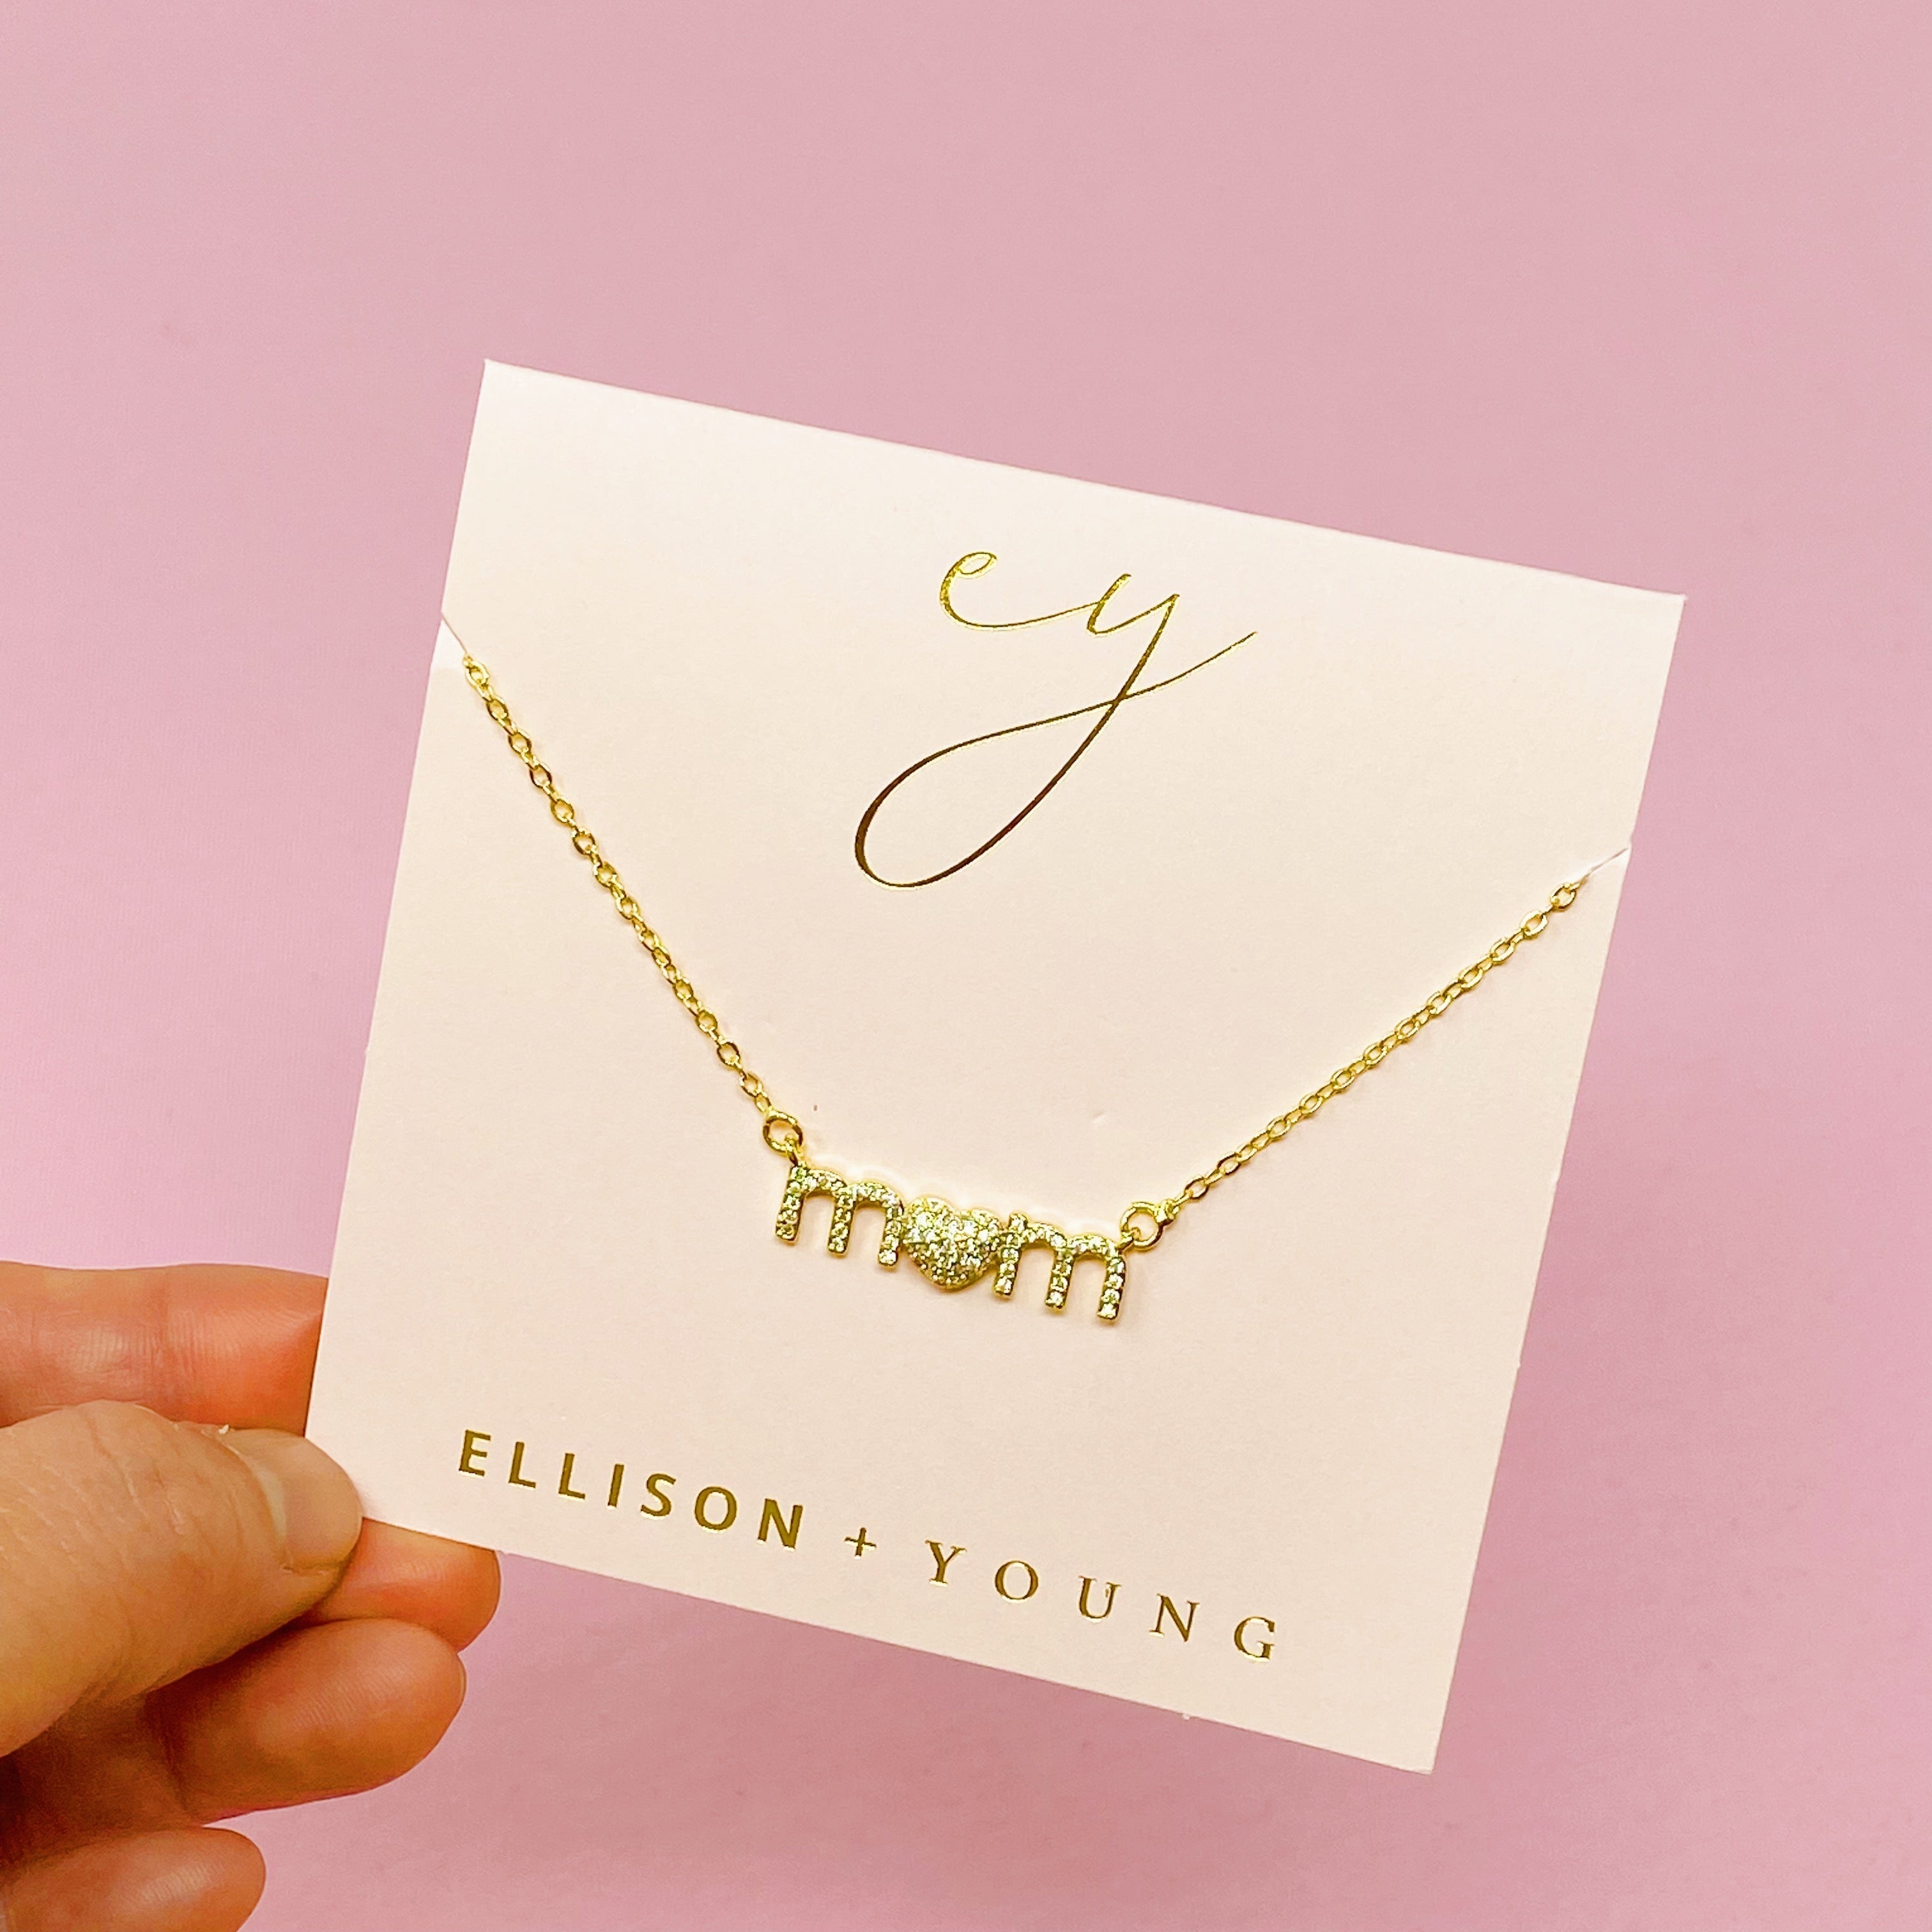 Lovely Mom Necklace by Ellisonyoung.com